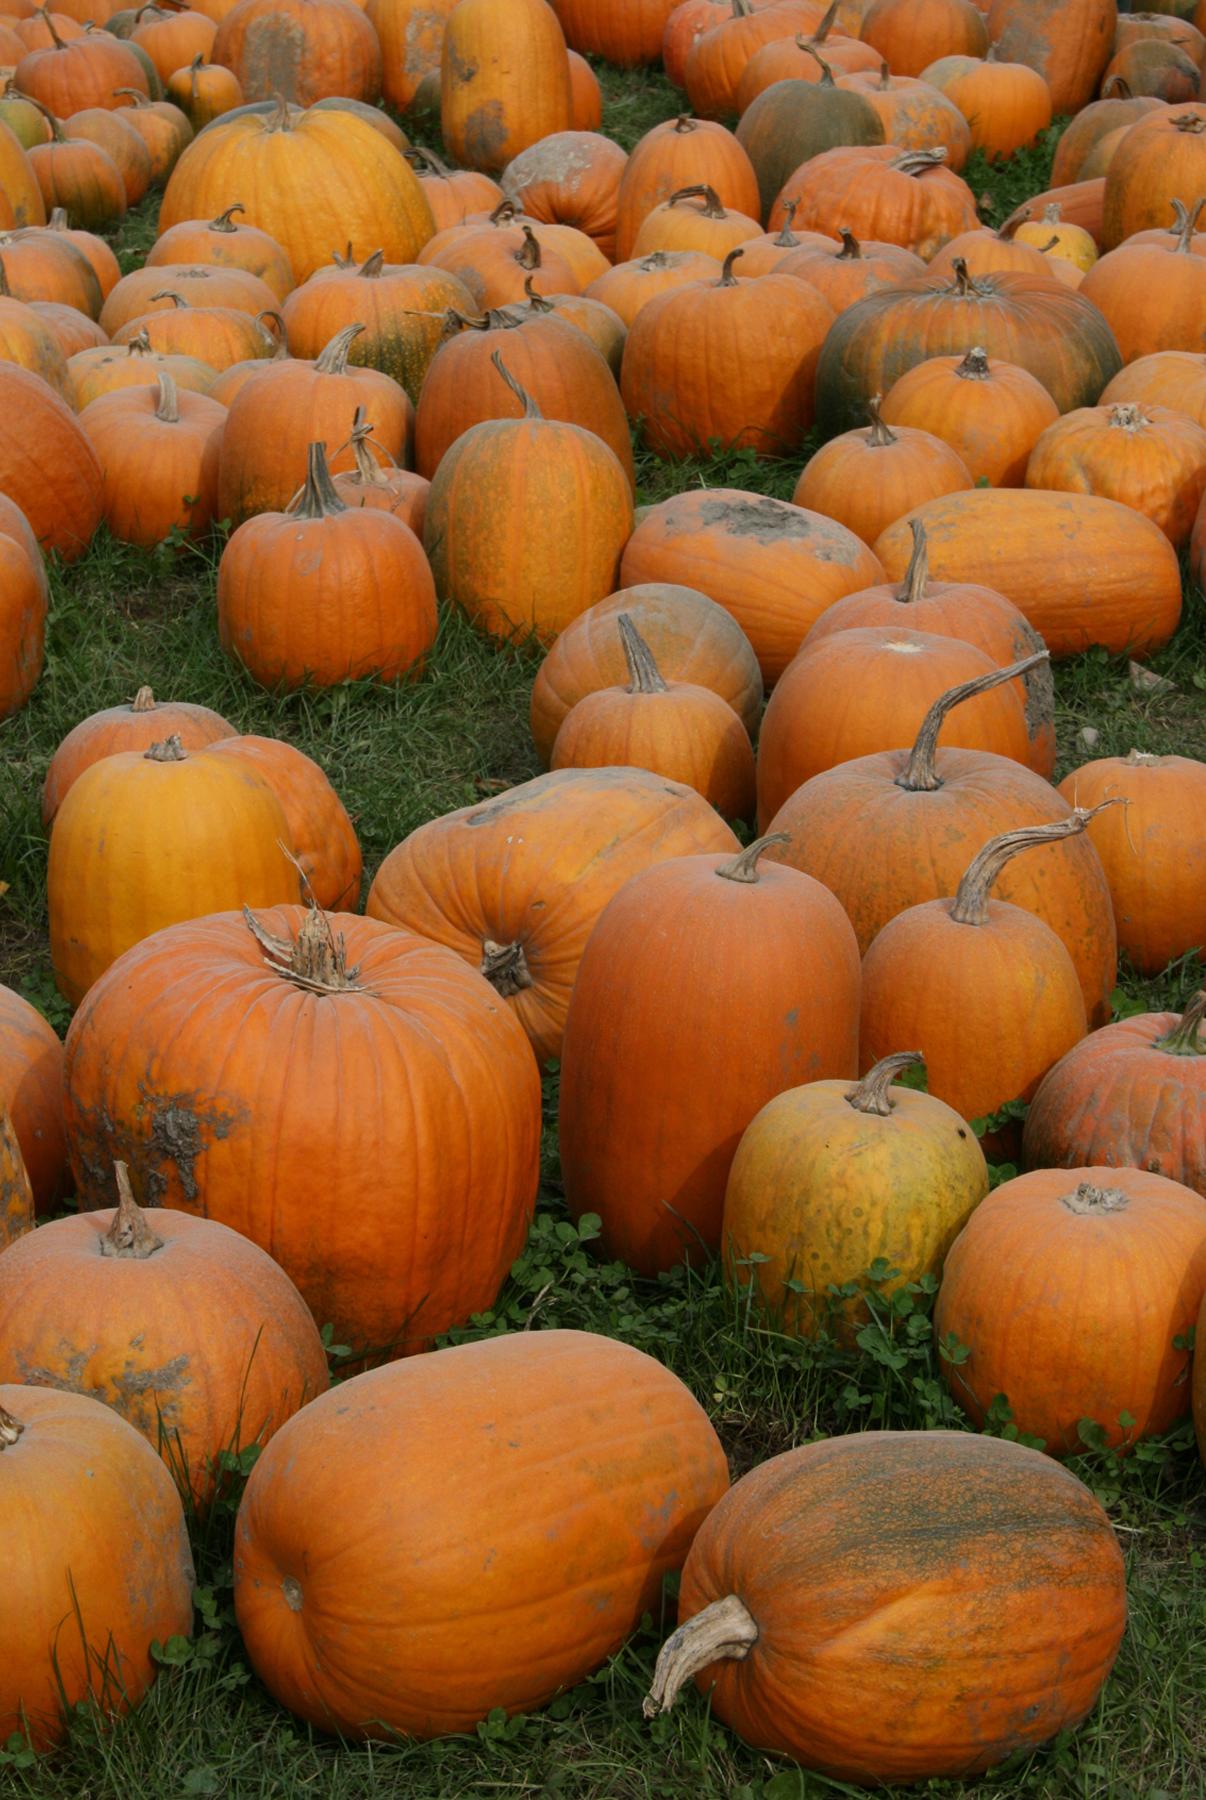 Punkins (user submitted)